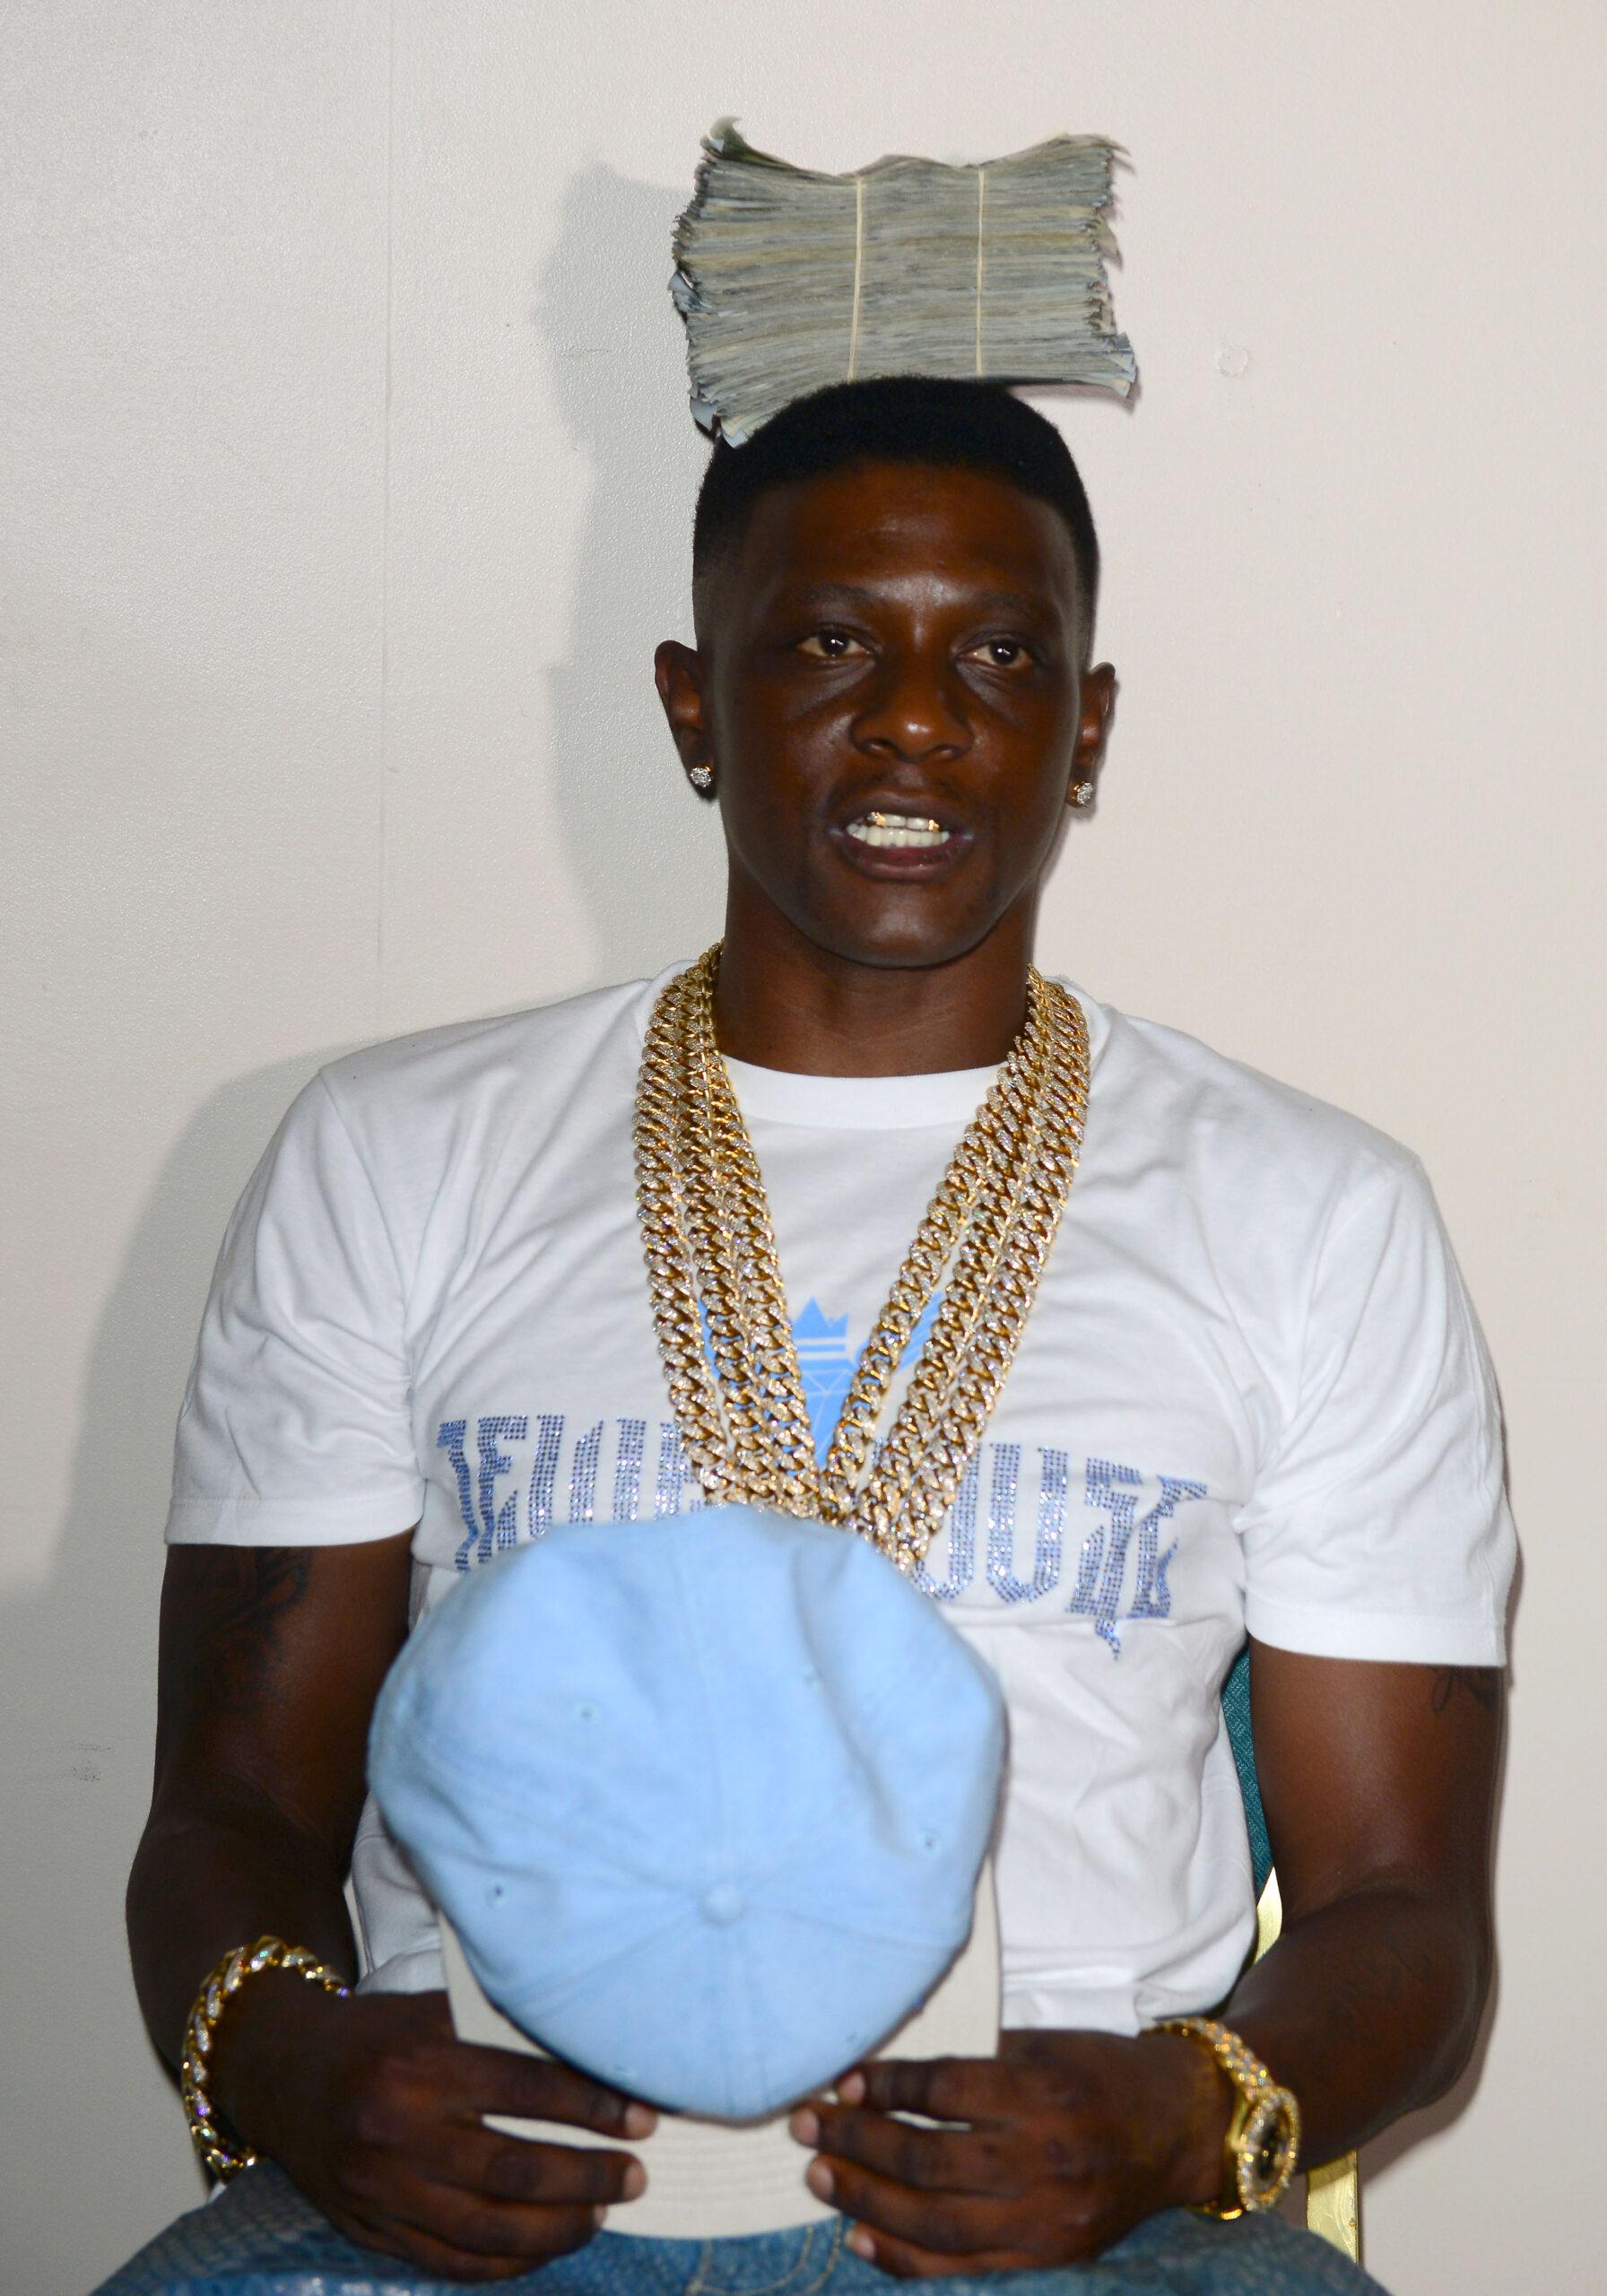 Lil’ Nas X’s Father SLAMS Rapper Lil’ Boosie Over Homophobic Remarks